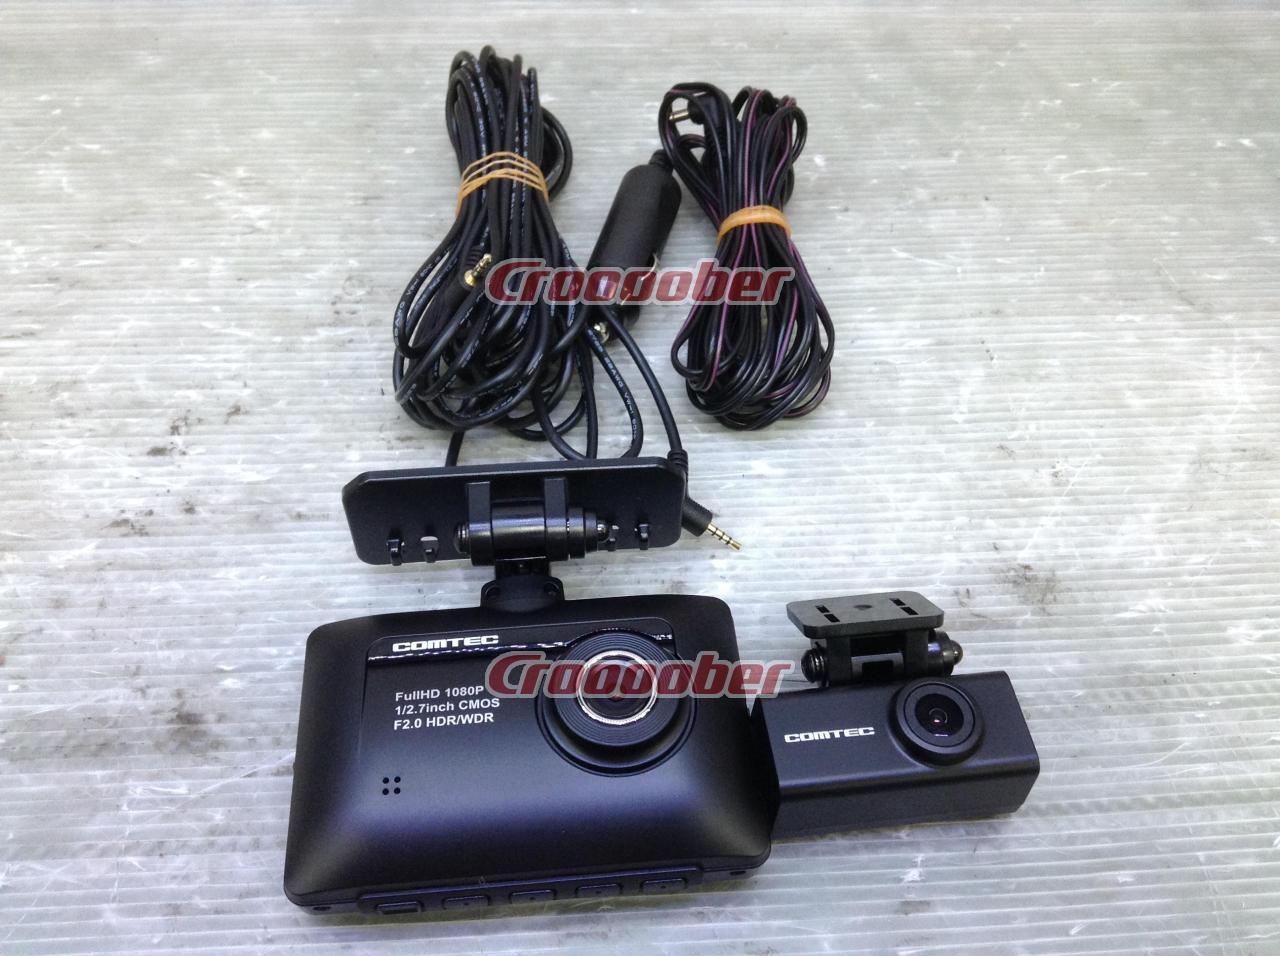 COMTEC Comtech ZDR-015 Front Rear Drive Recorder Popular Before And After  Recording Type | Drive Recorder | Croooober